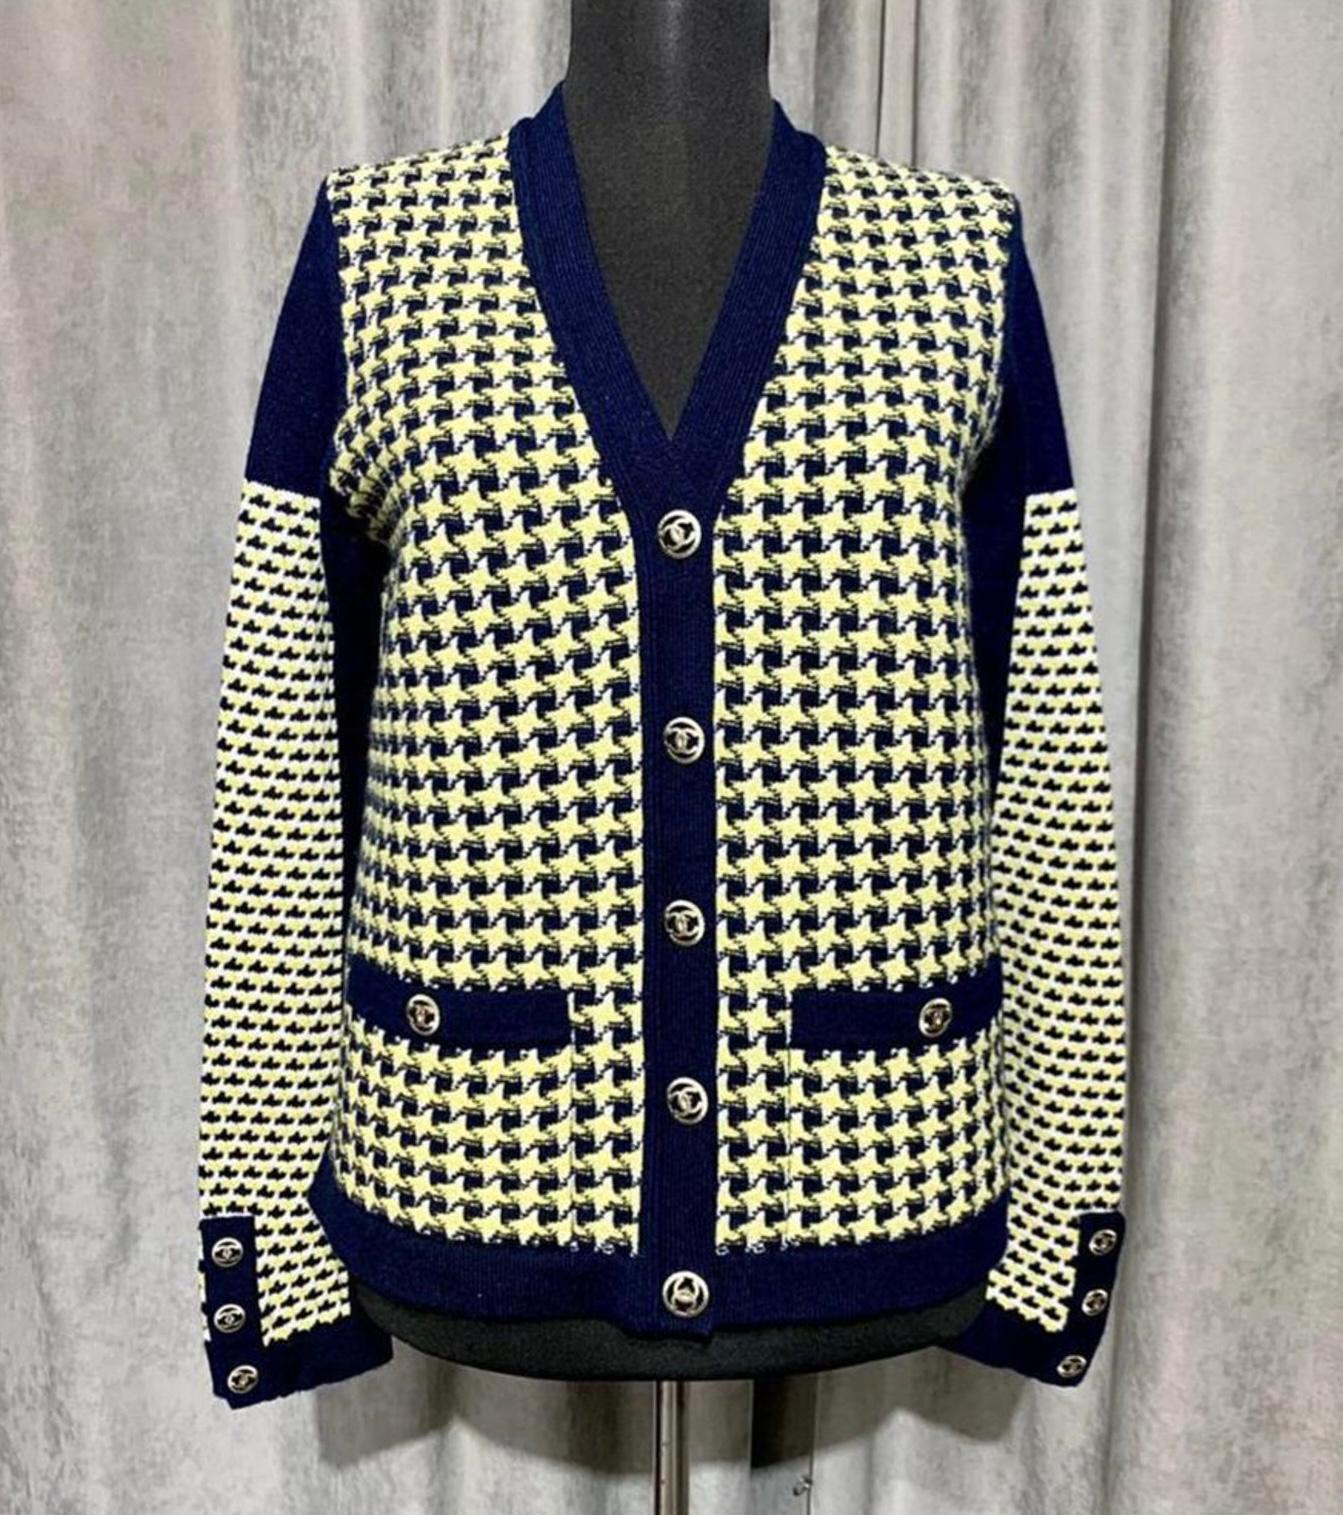 Chanel navy and yellow cashmere jacket with CC logo buttons.
Size mark 44 FR. Never worn.